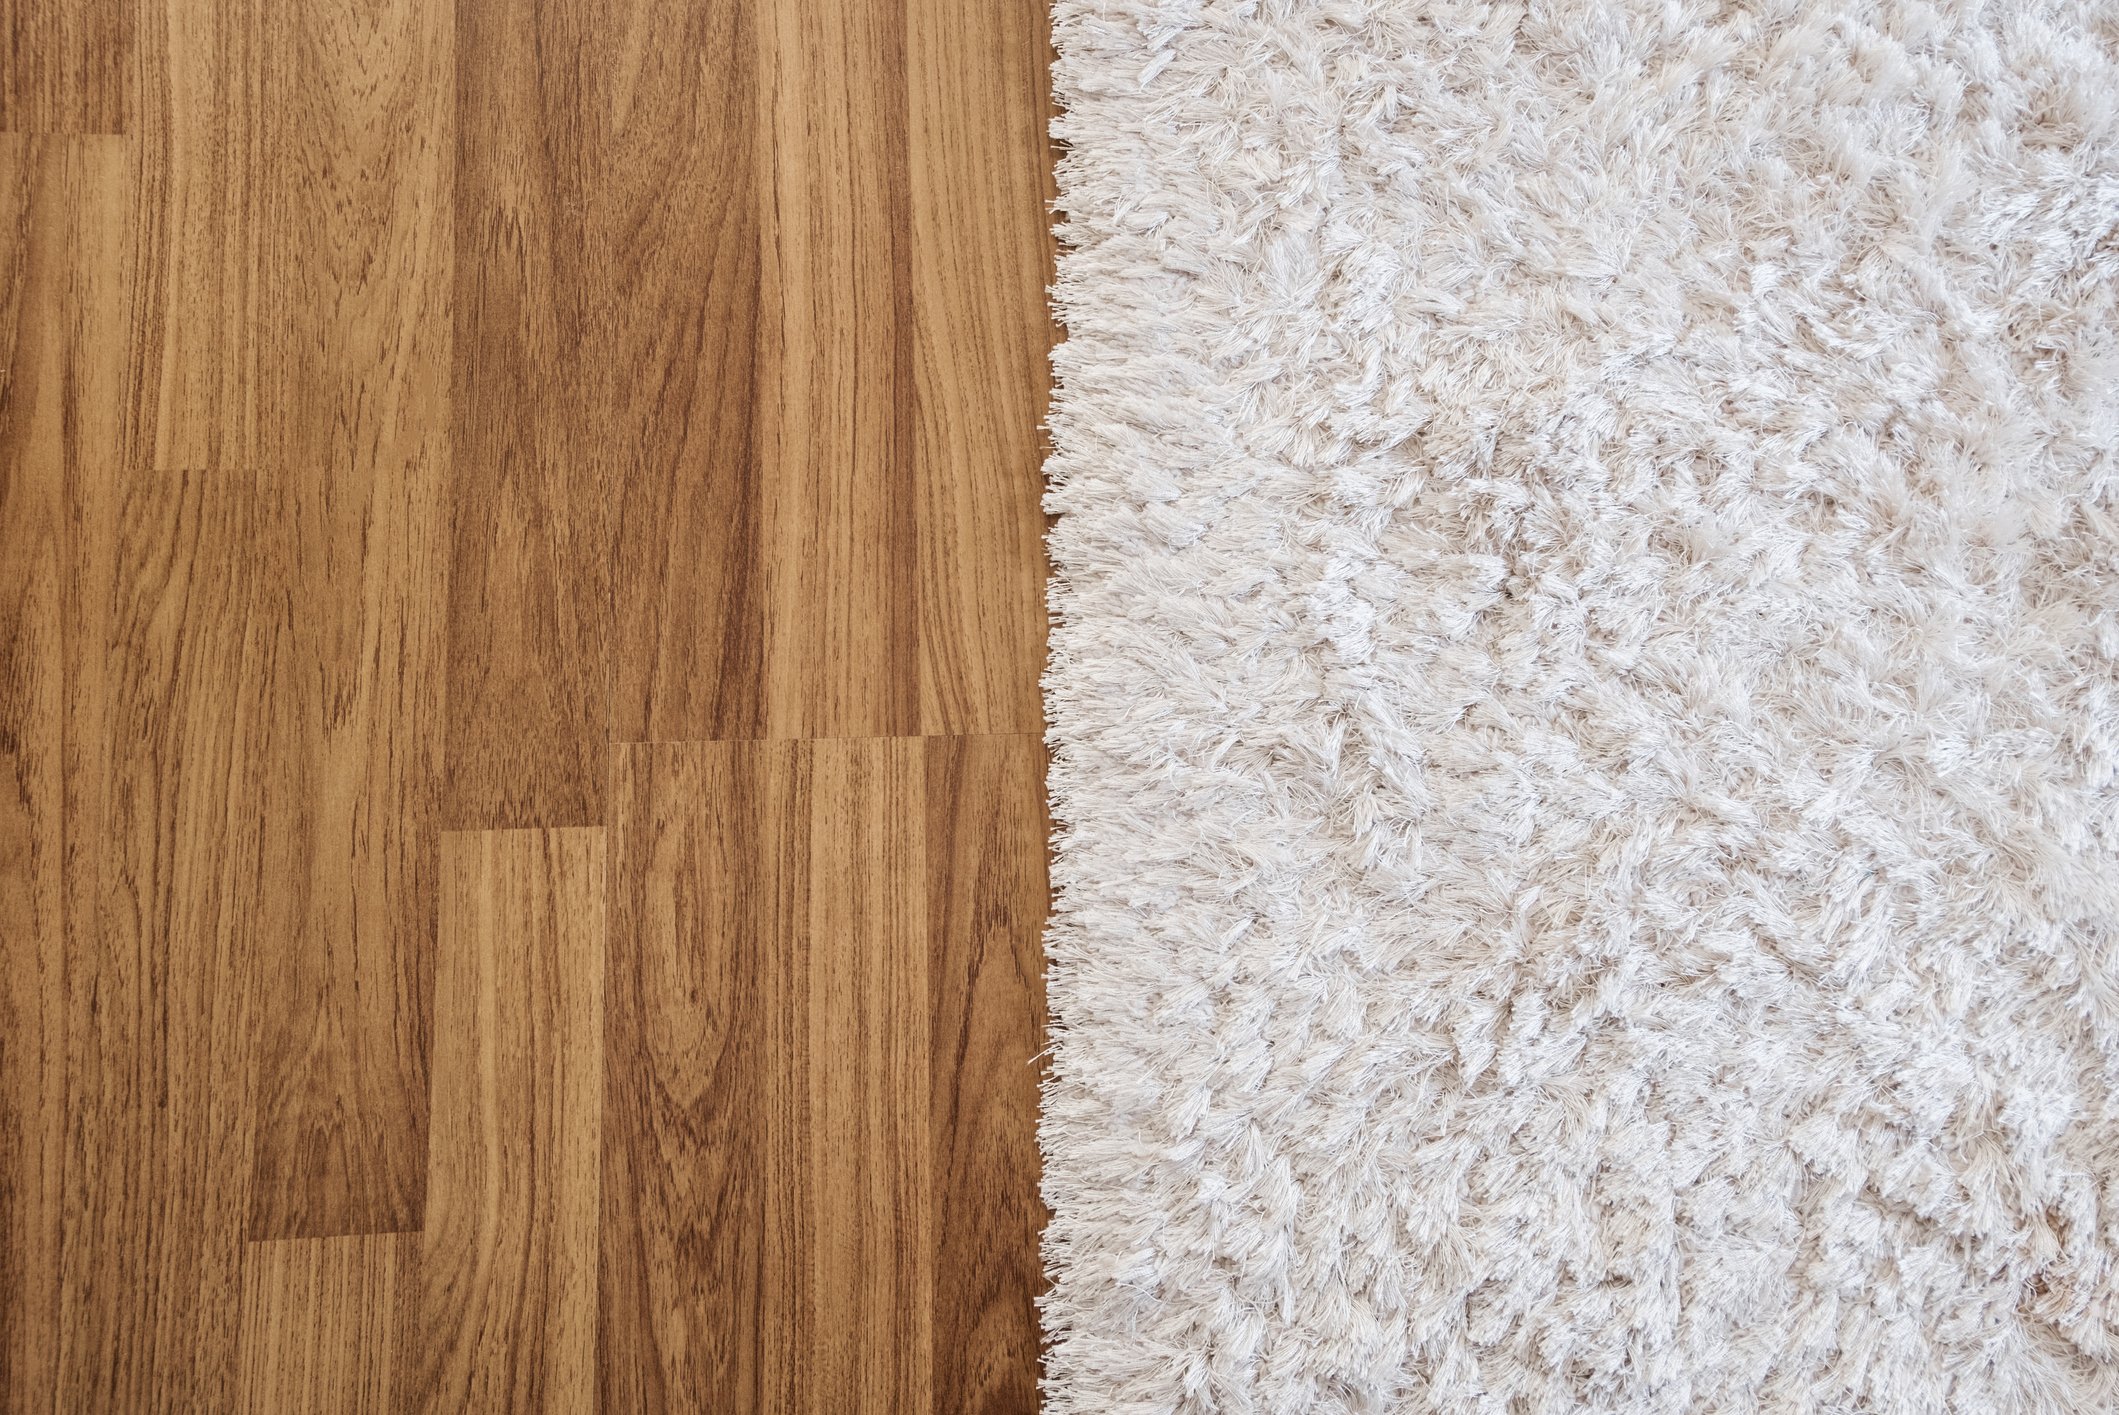 4 Reasons to Choose Wood Flooring Over Carpet in Your Home